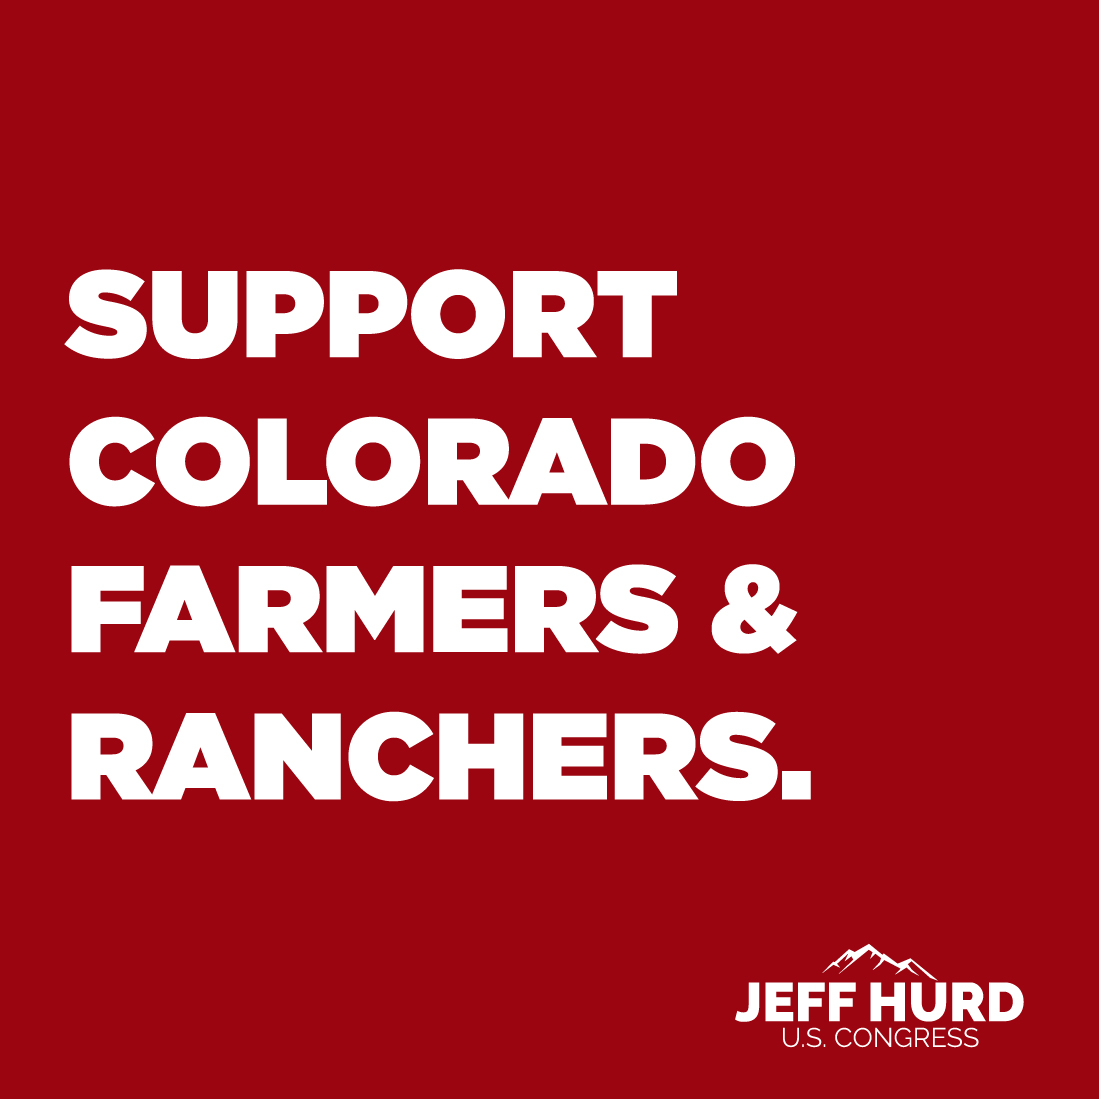 If you care about supporting Colorado farmers and ranchers, I'd be honored to have your vote. #cofarmers #coranchers #co03